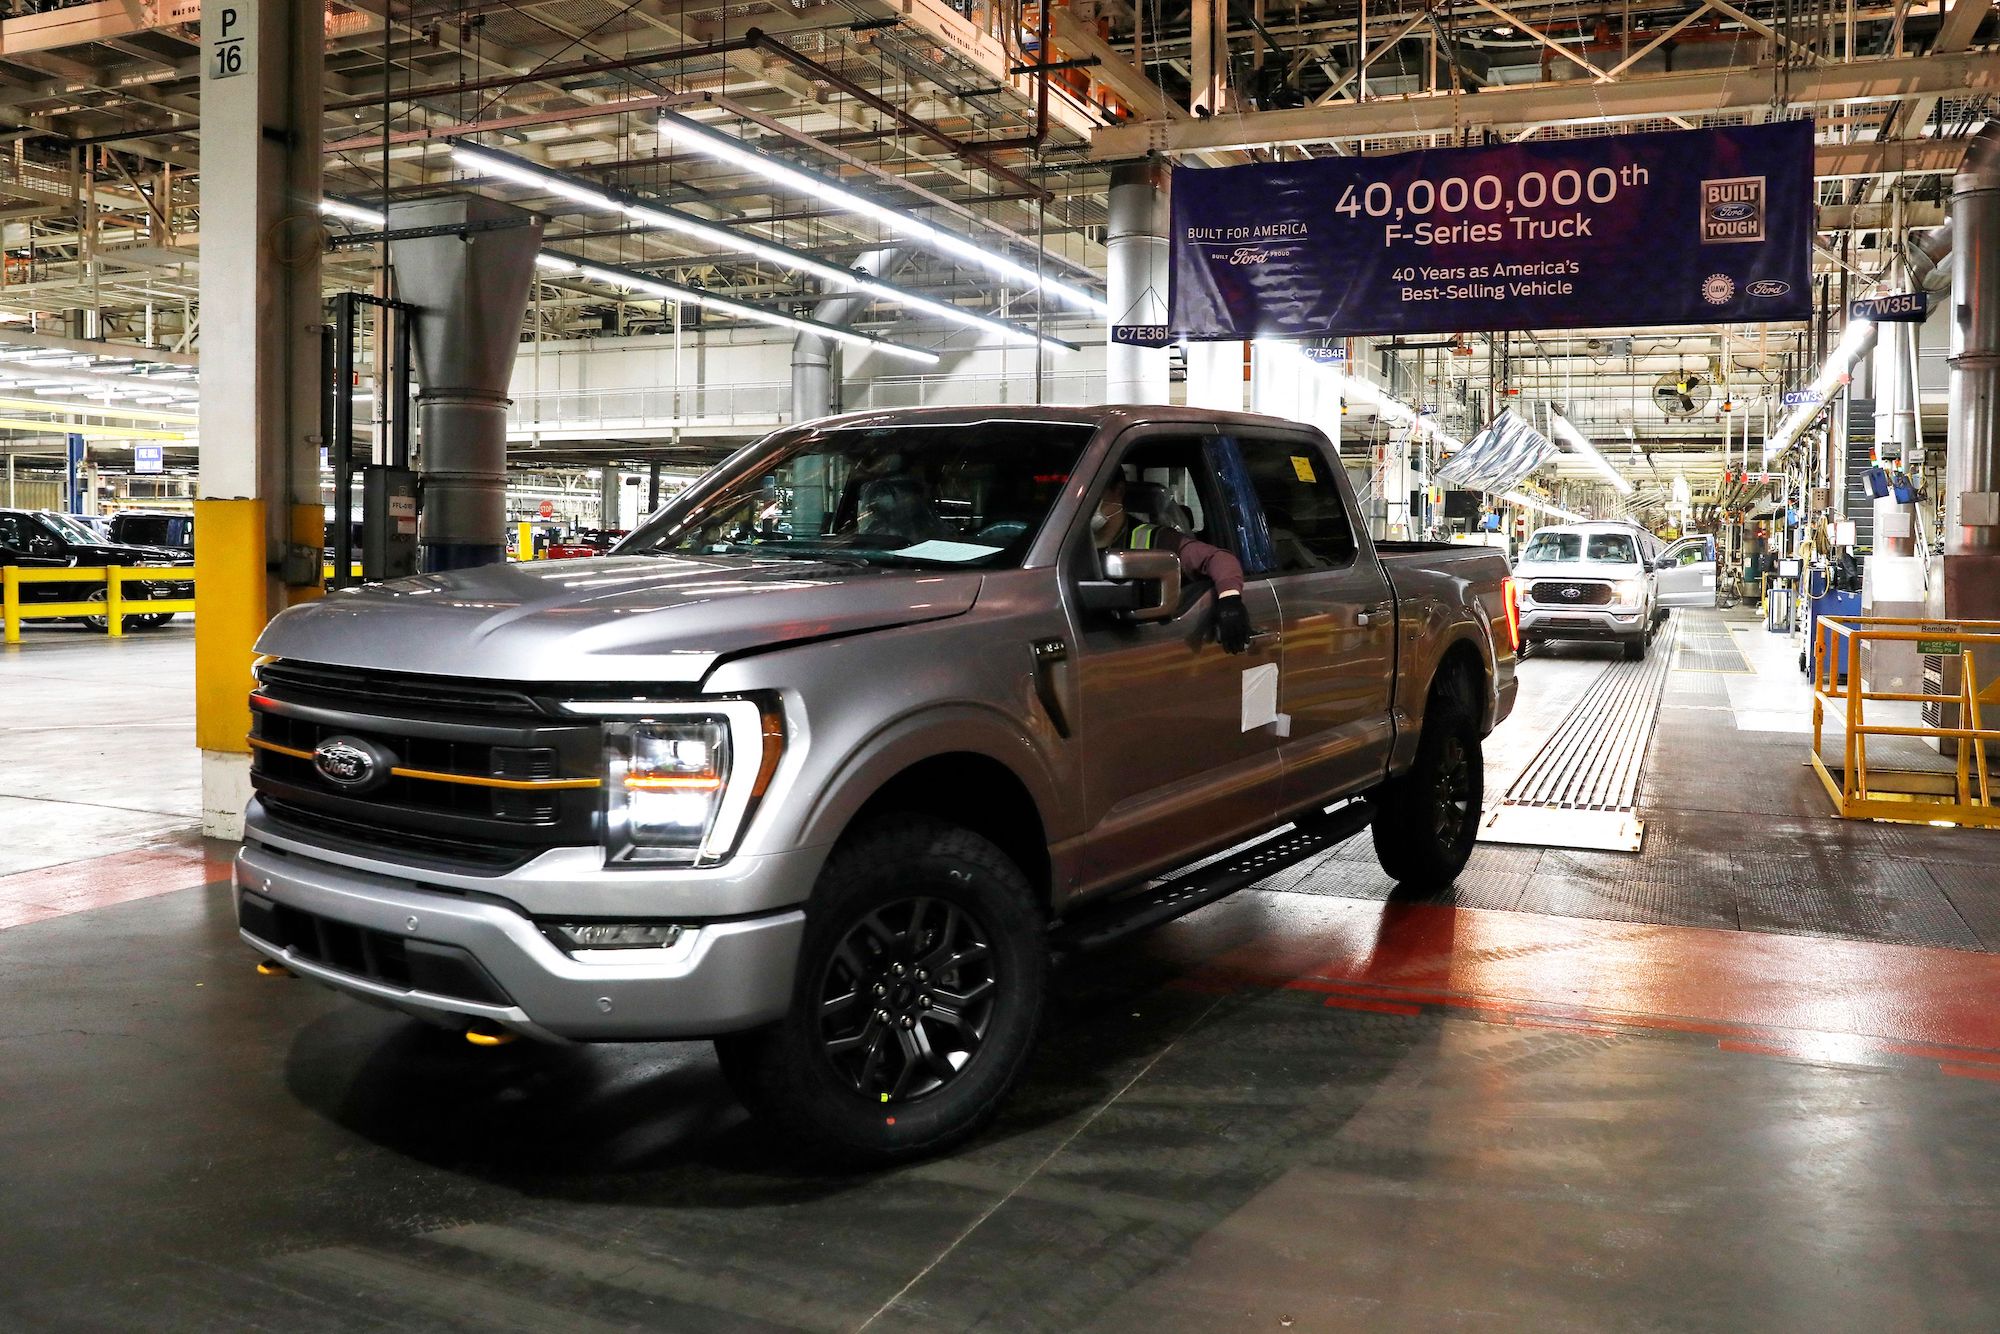 Thieves Steal Over $1 Million of Ford Vehicles From the Manufacturing facility Storage Lot